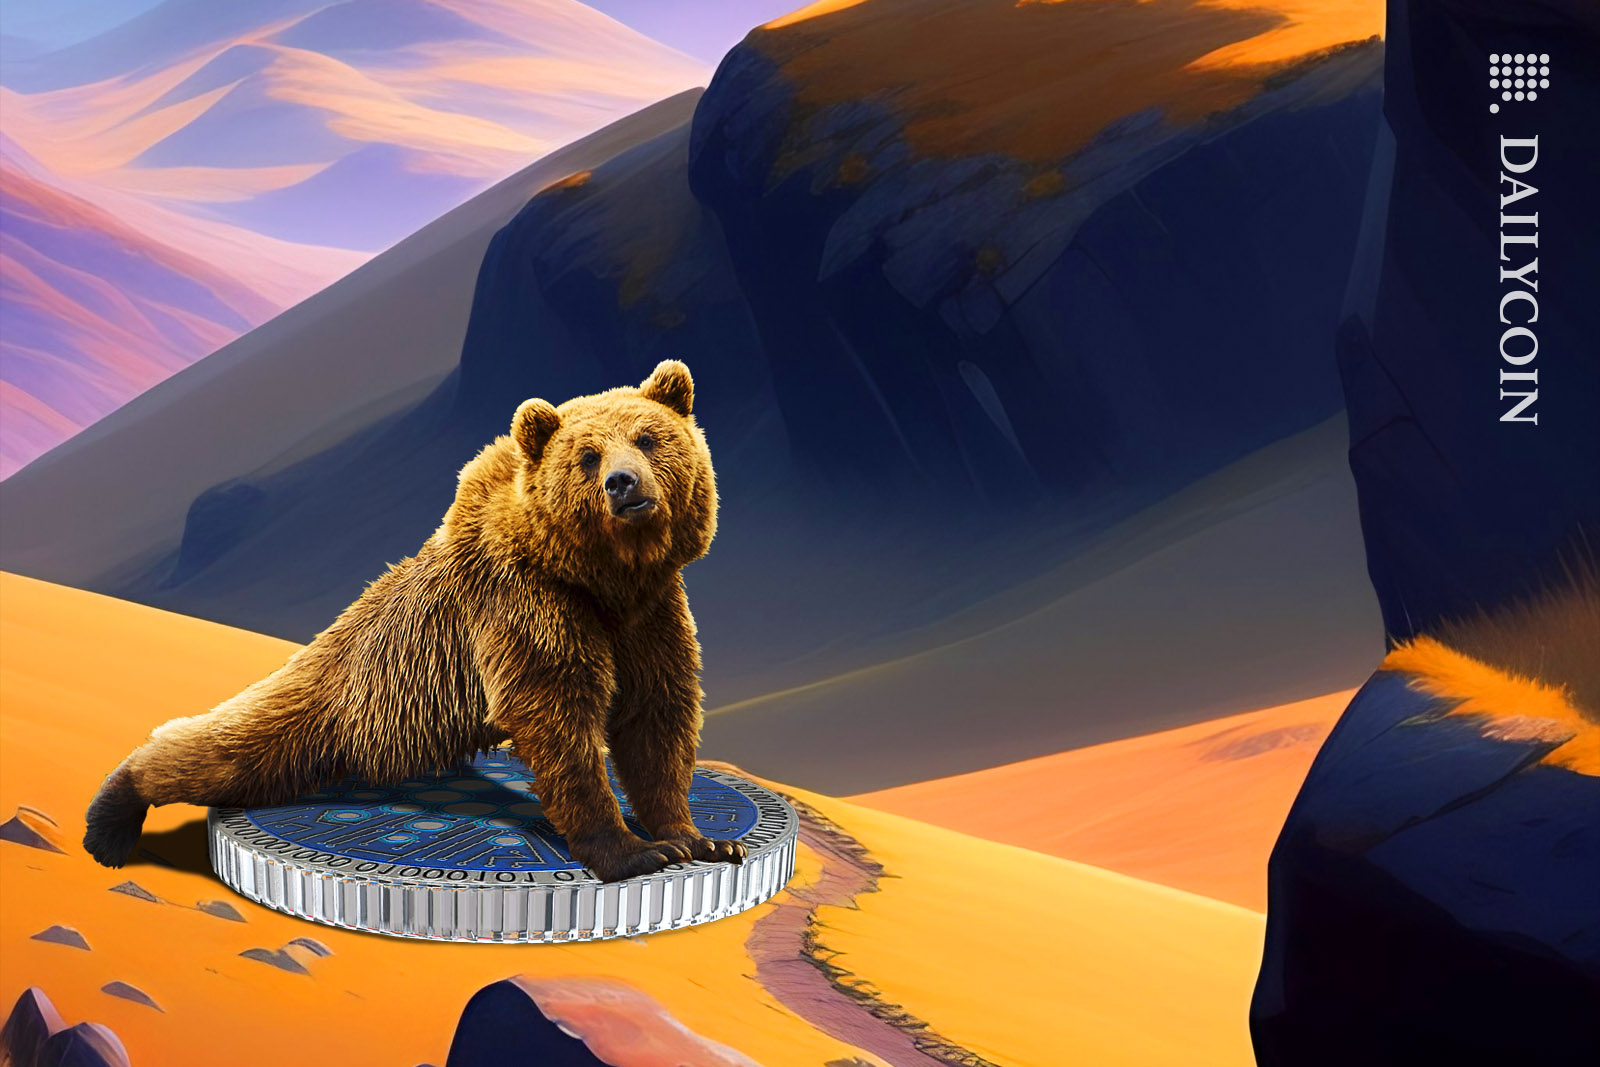 Big grizzly bear on top of a cardano coin in a beautyful mountain range.